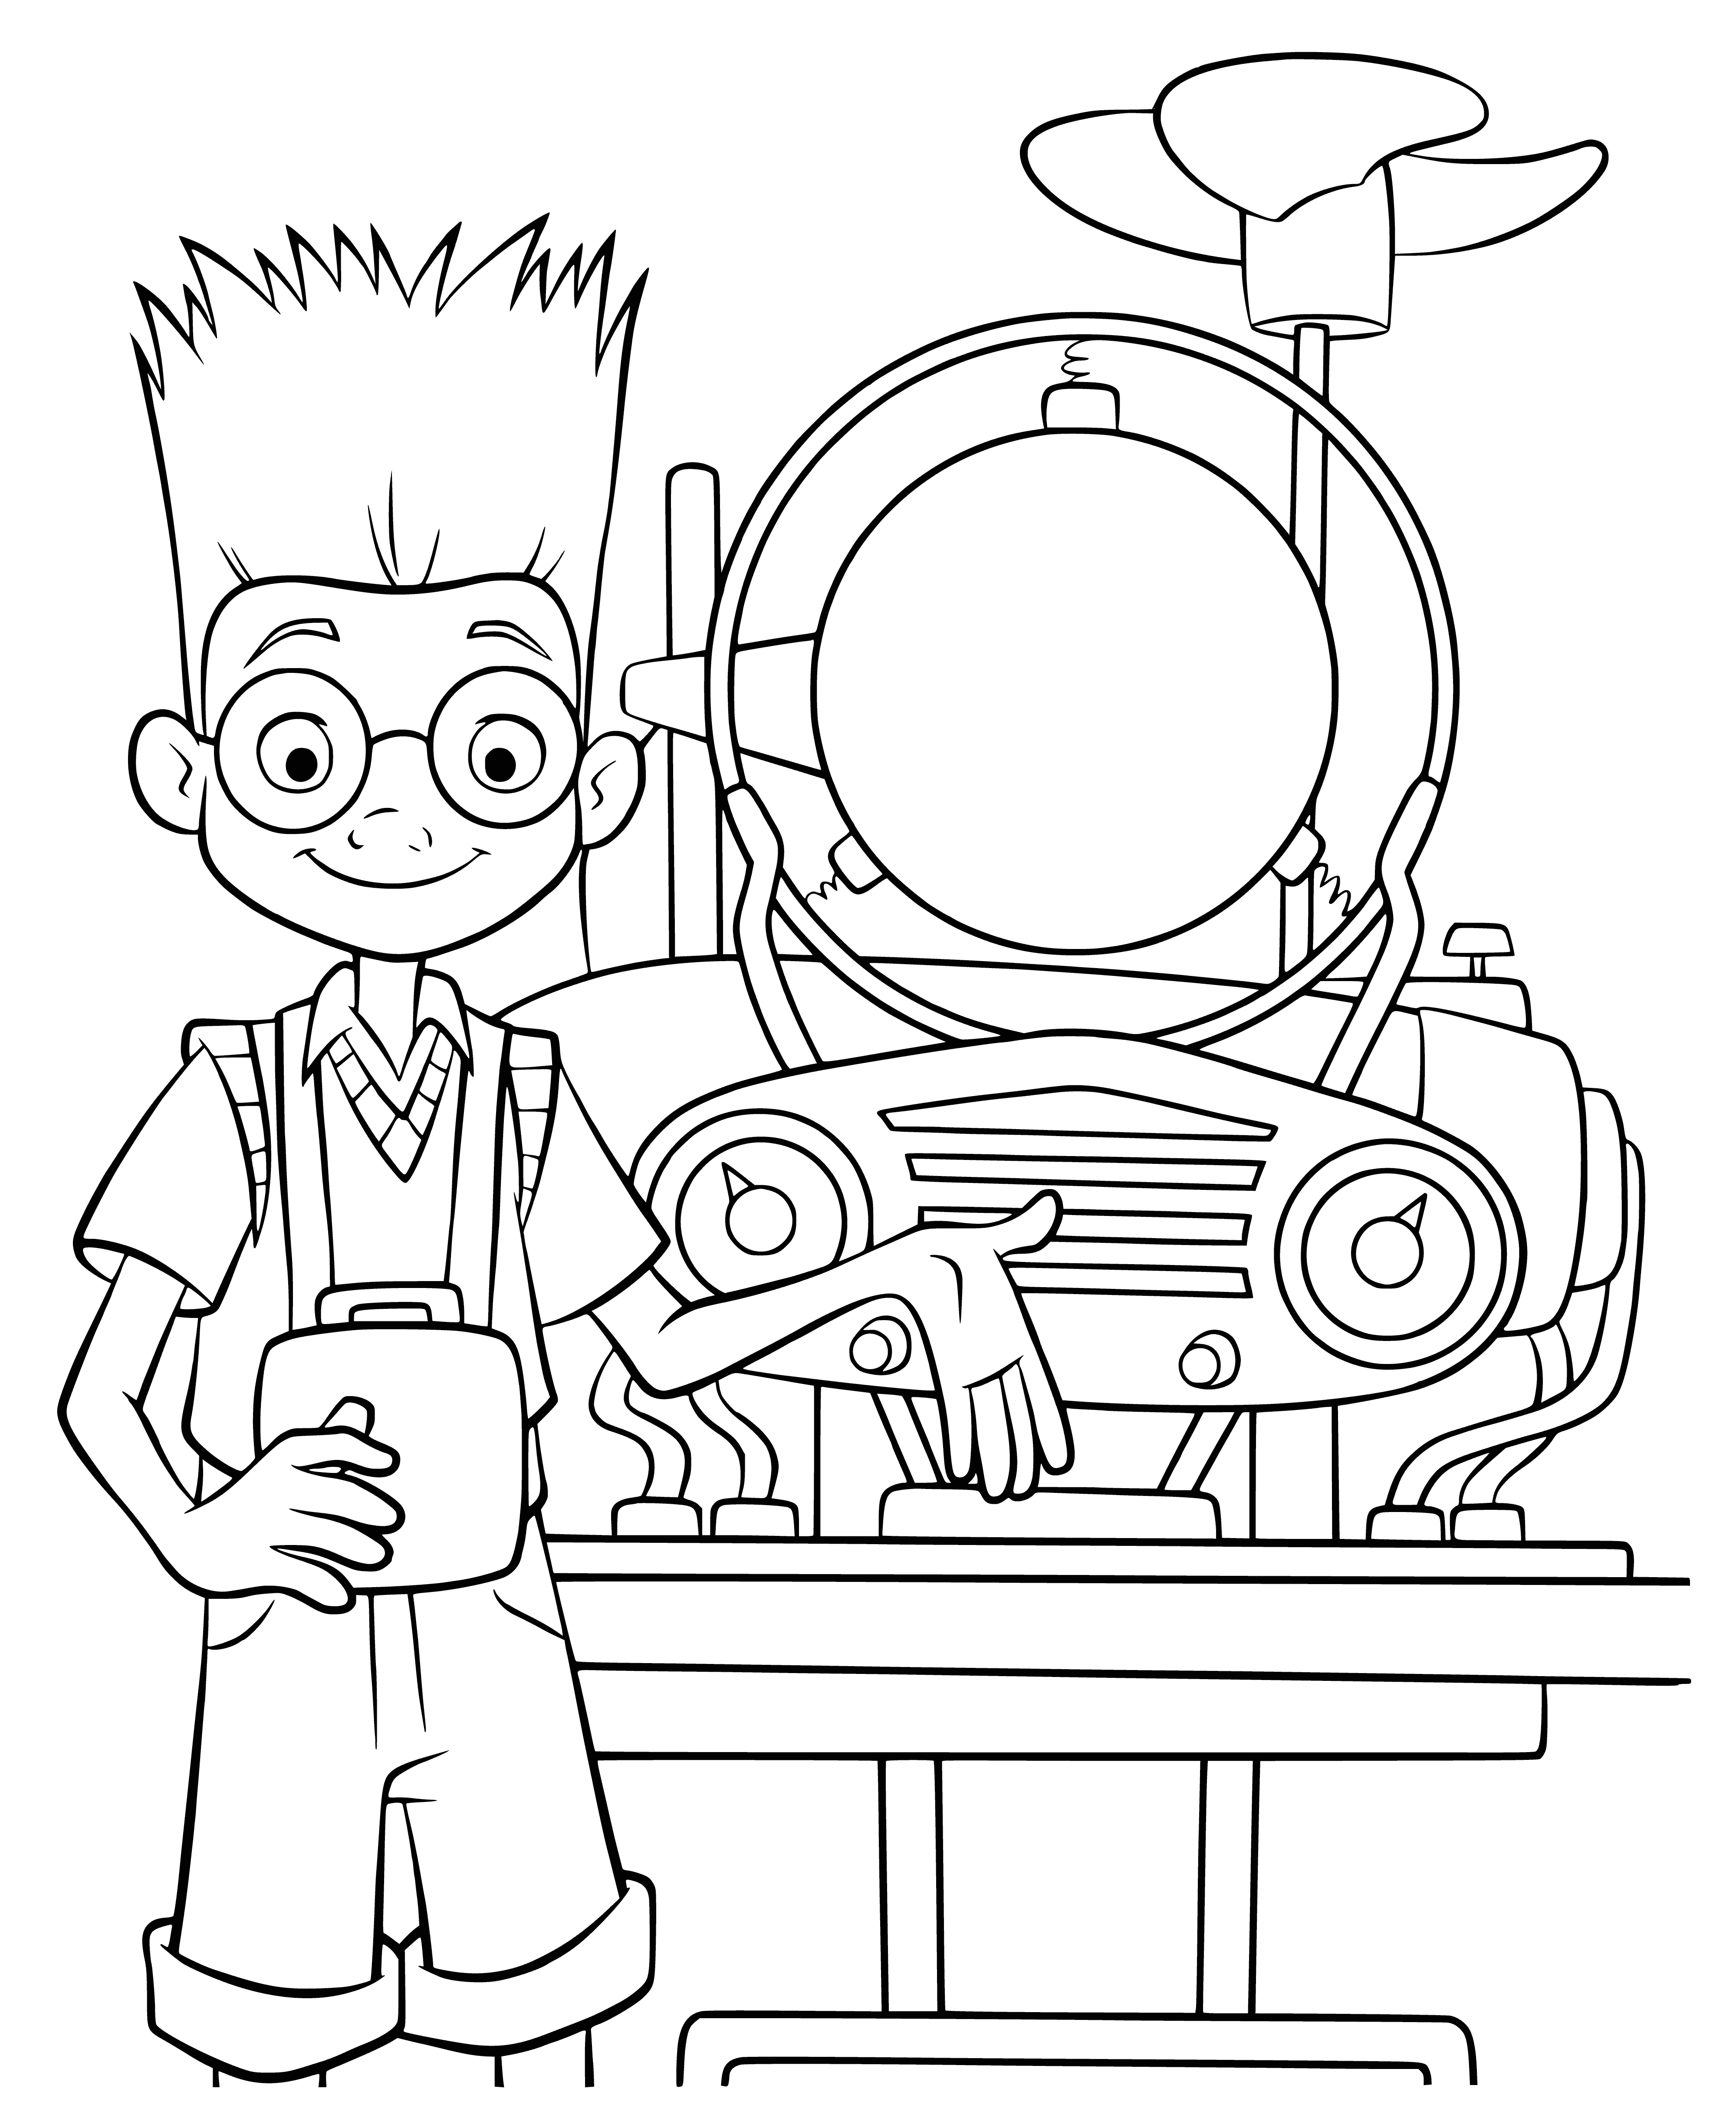 coloring page: Lewis, a budding inventor, is surprised by a revelation & surrounded by inventions. He has posters of famous scientists.